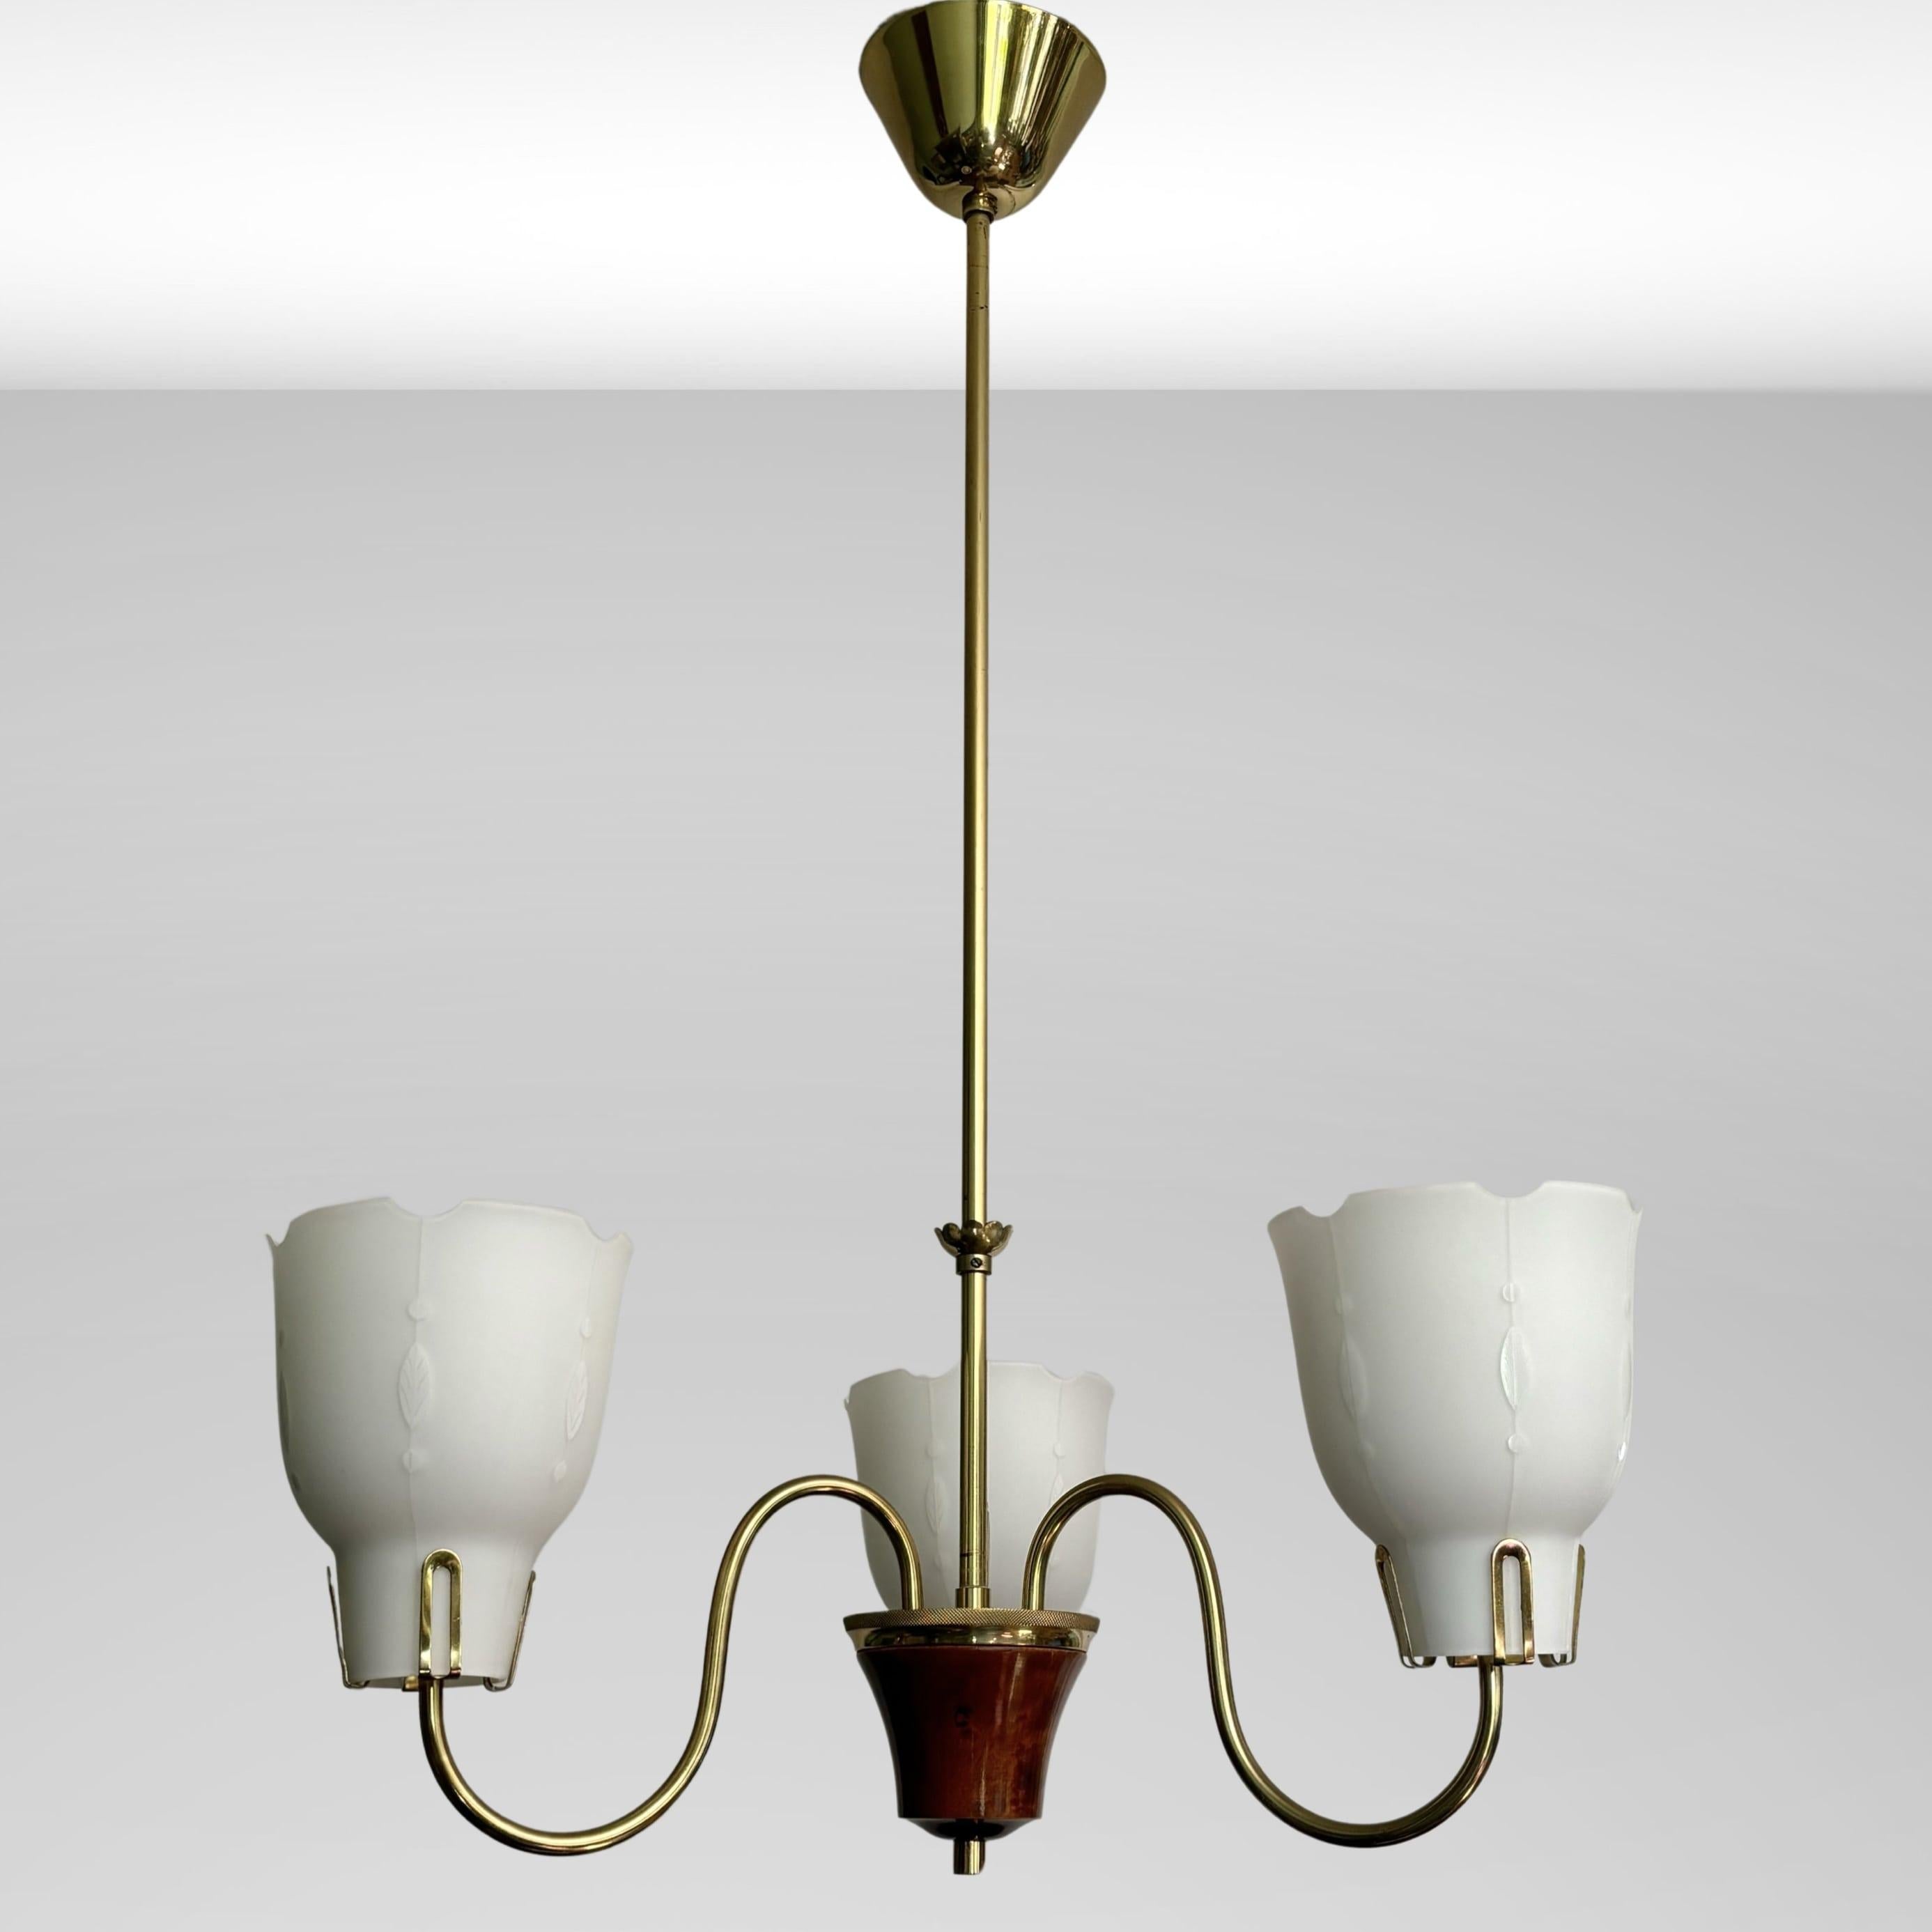 A Swedish 1940s chandelier made from brass and walnut with three curved arms holding bell-shaped shades in opal glass. Each shade has a discreet white leaf pattern, adding an extra touch of elegance. With its minimalistic shape and clean lines, this